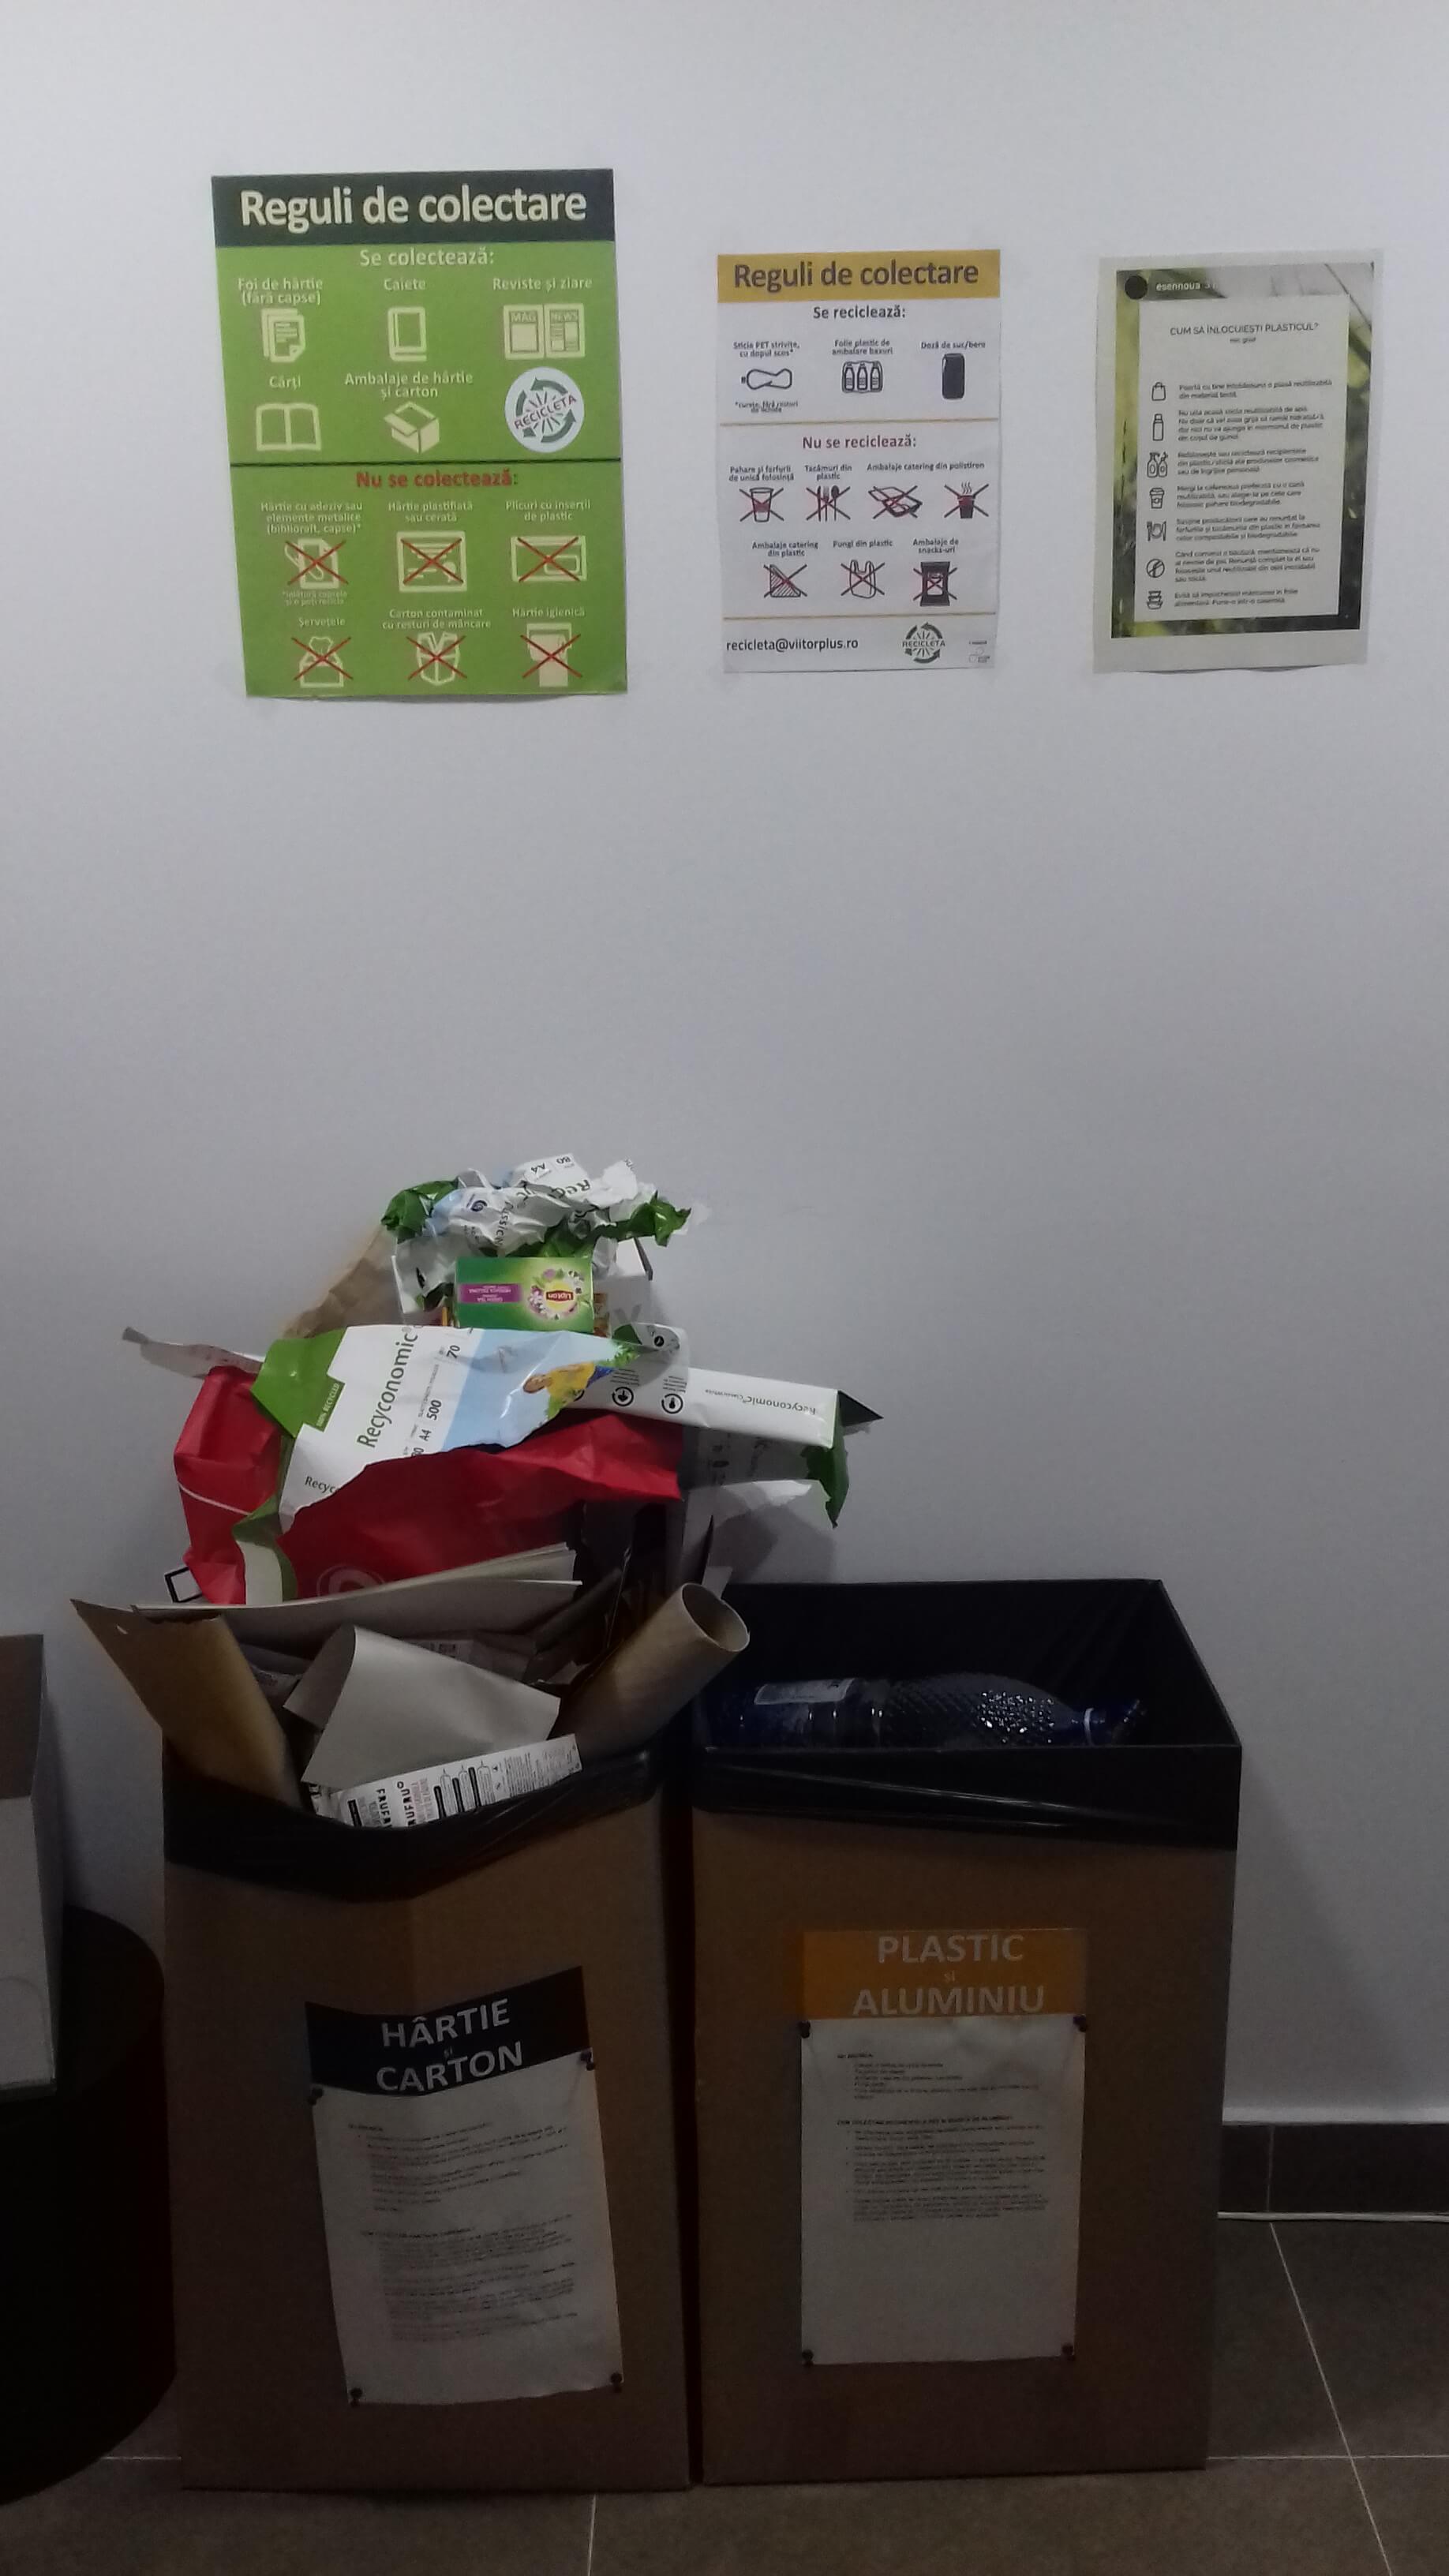 Separate office waste collection with the help of “Recicleta” program in Accace Romania CSR